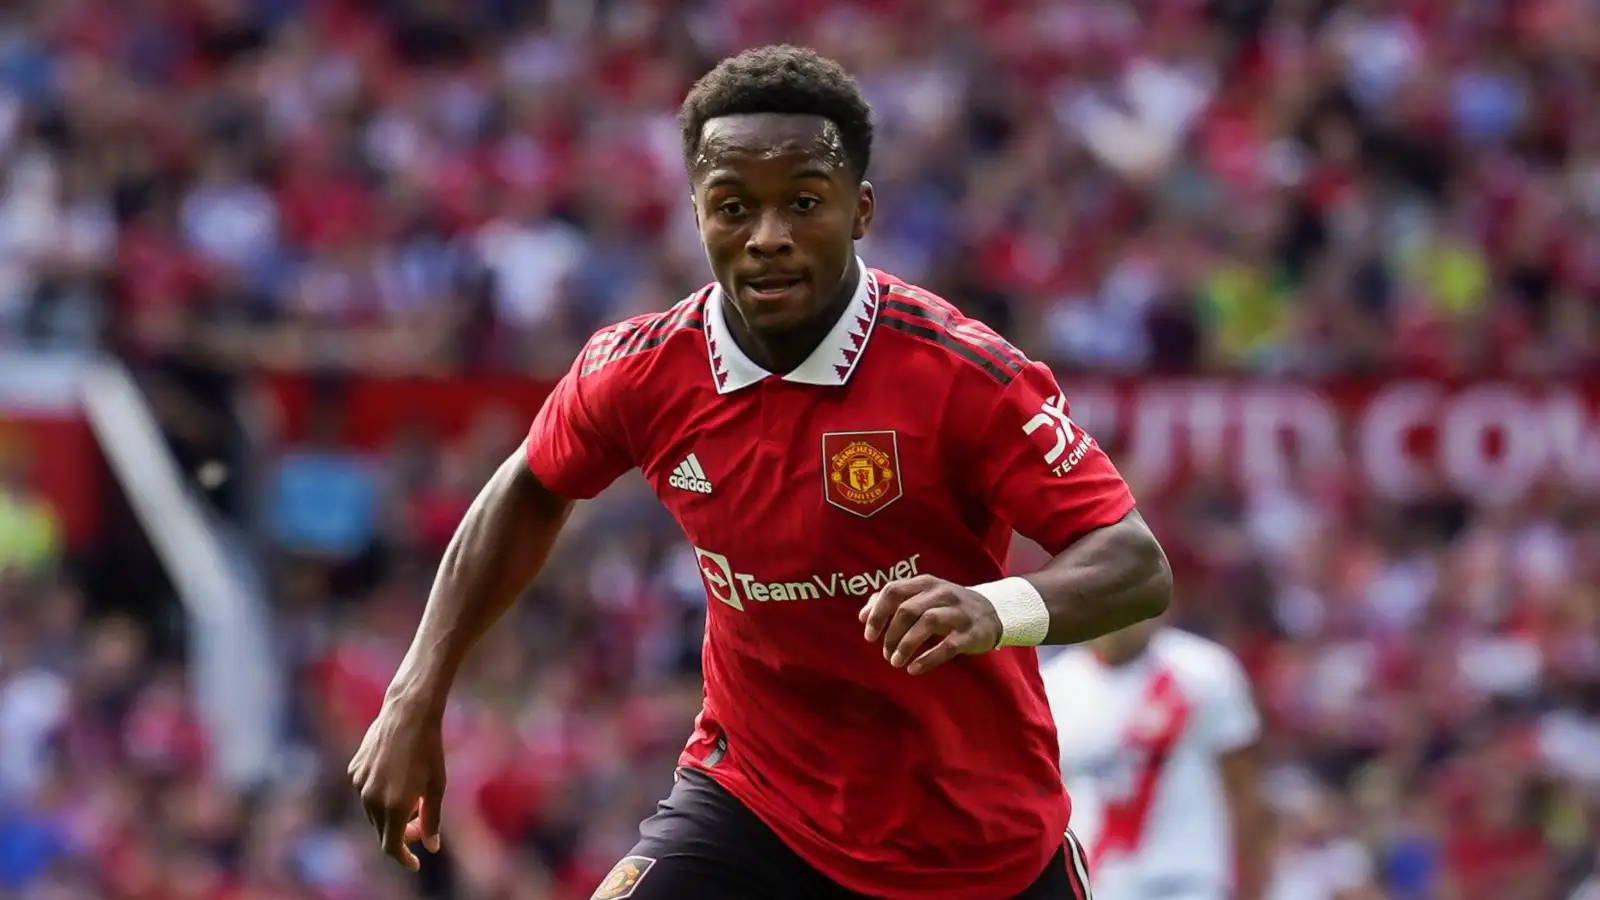 Watch: Manchester United loanee Ethan Laird scores first goal for QPR